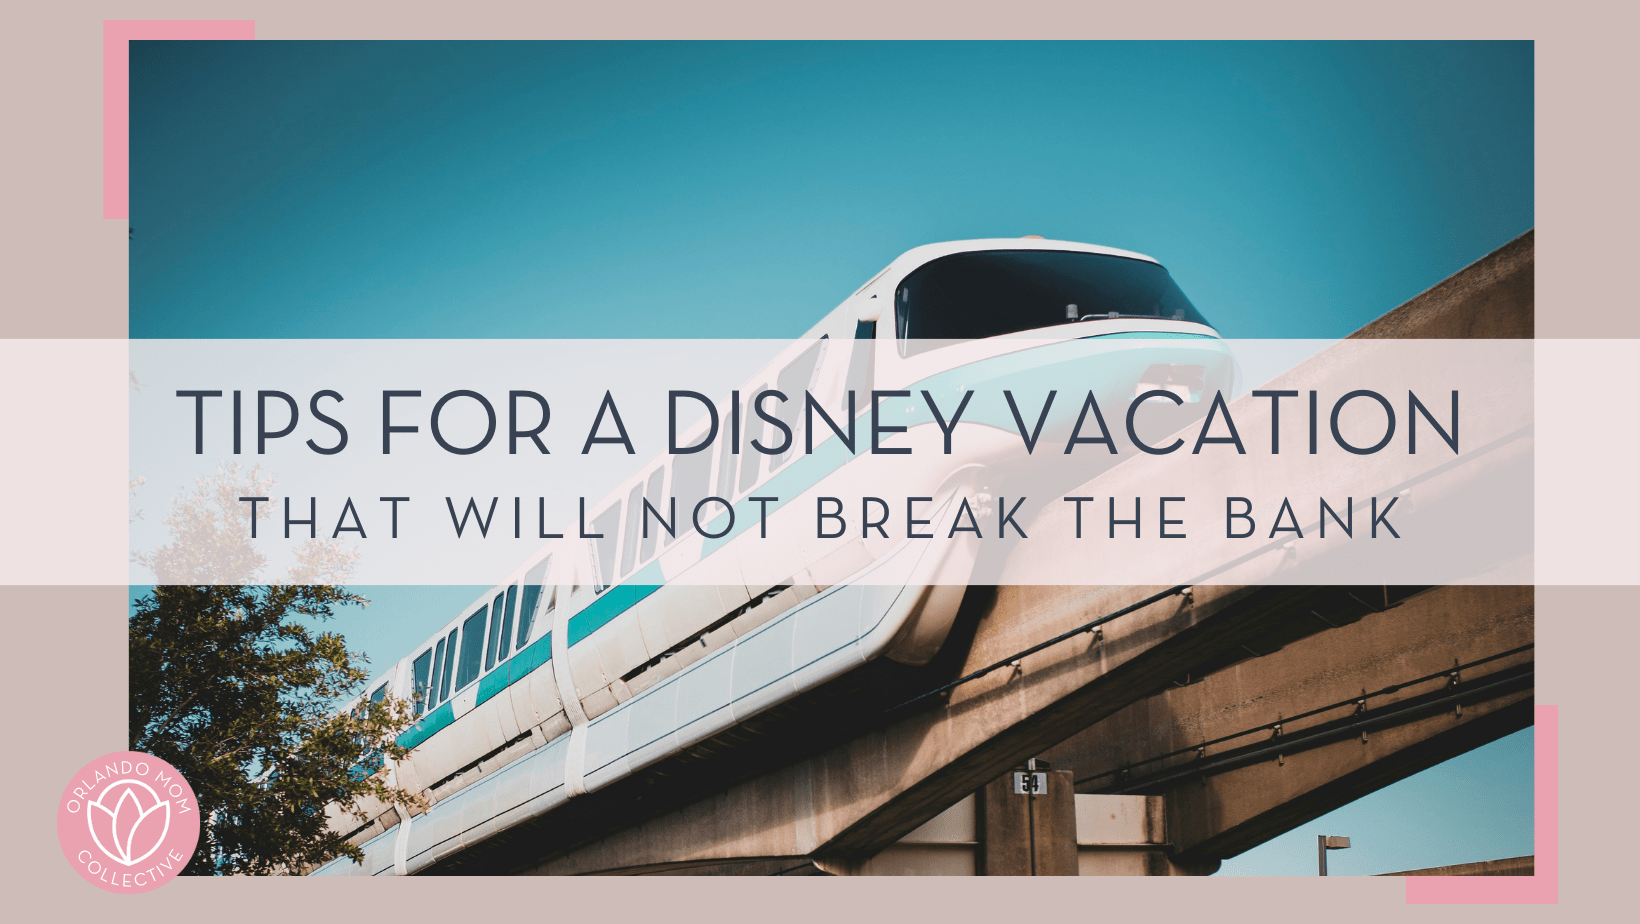 christian lambert via unsplash photo of blue monorail with words 'tips for a Disney Vacation that will not break the bank' over